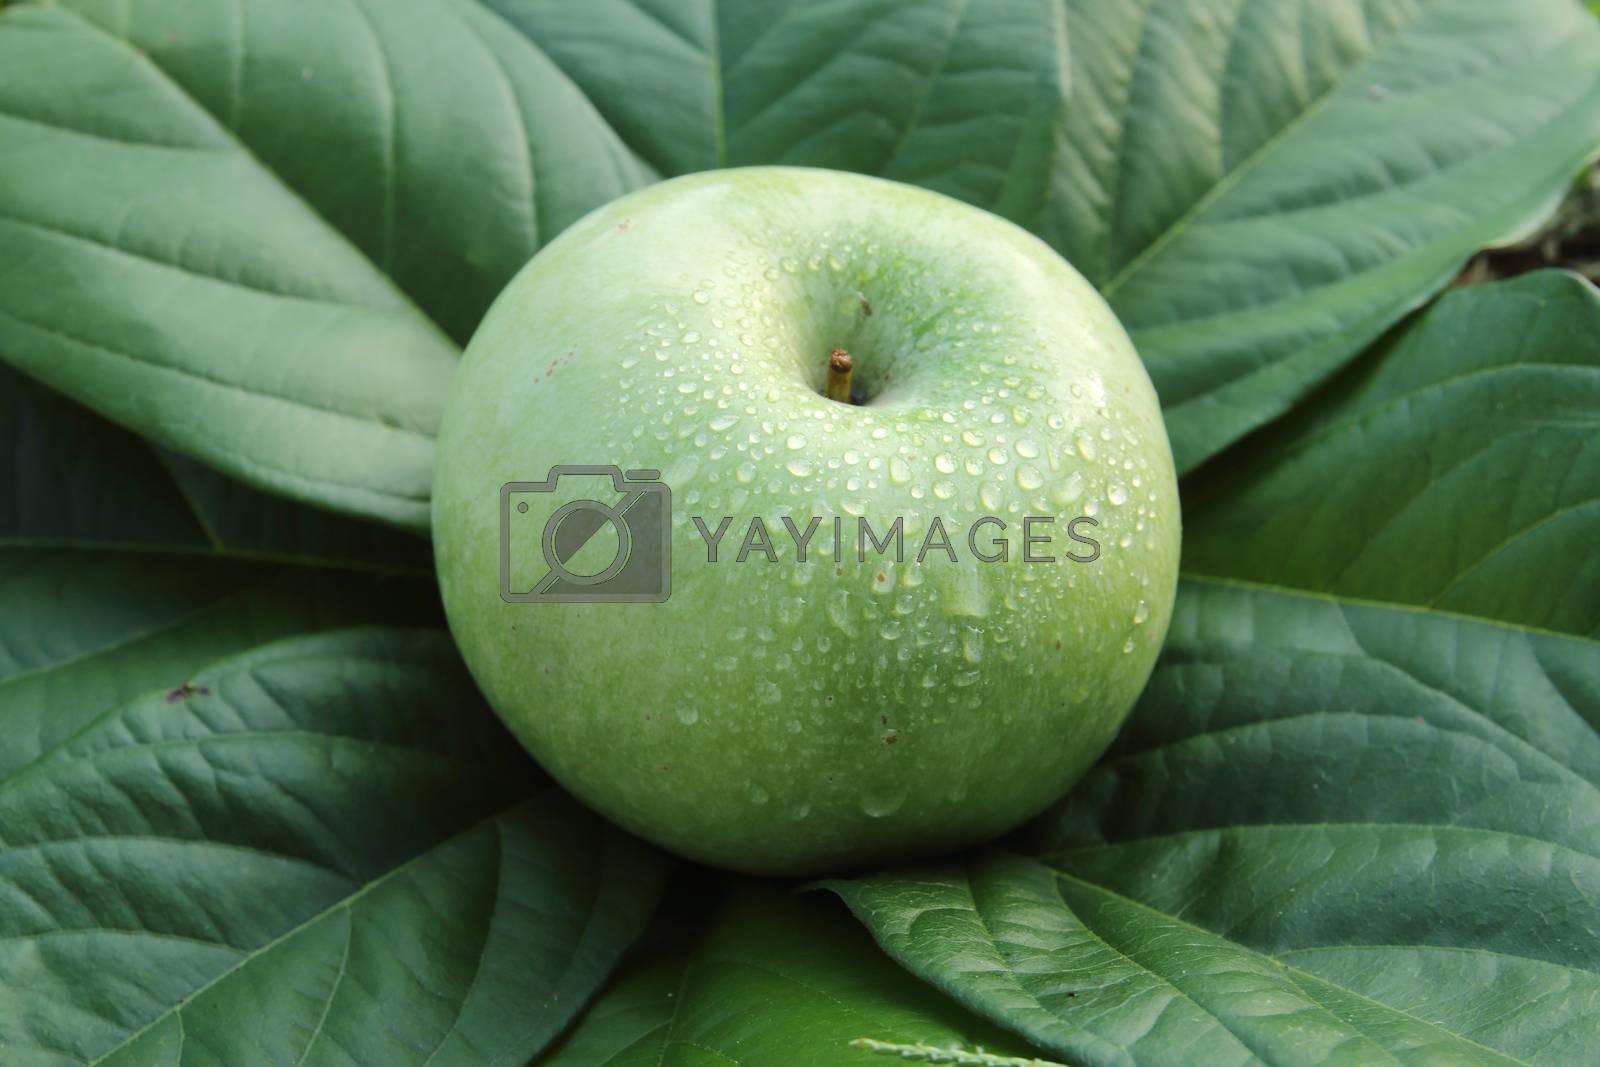 Royalty free image of green apple on the leaves by kaidevil